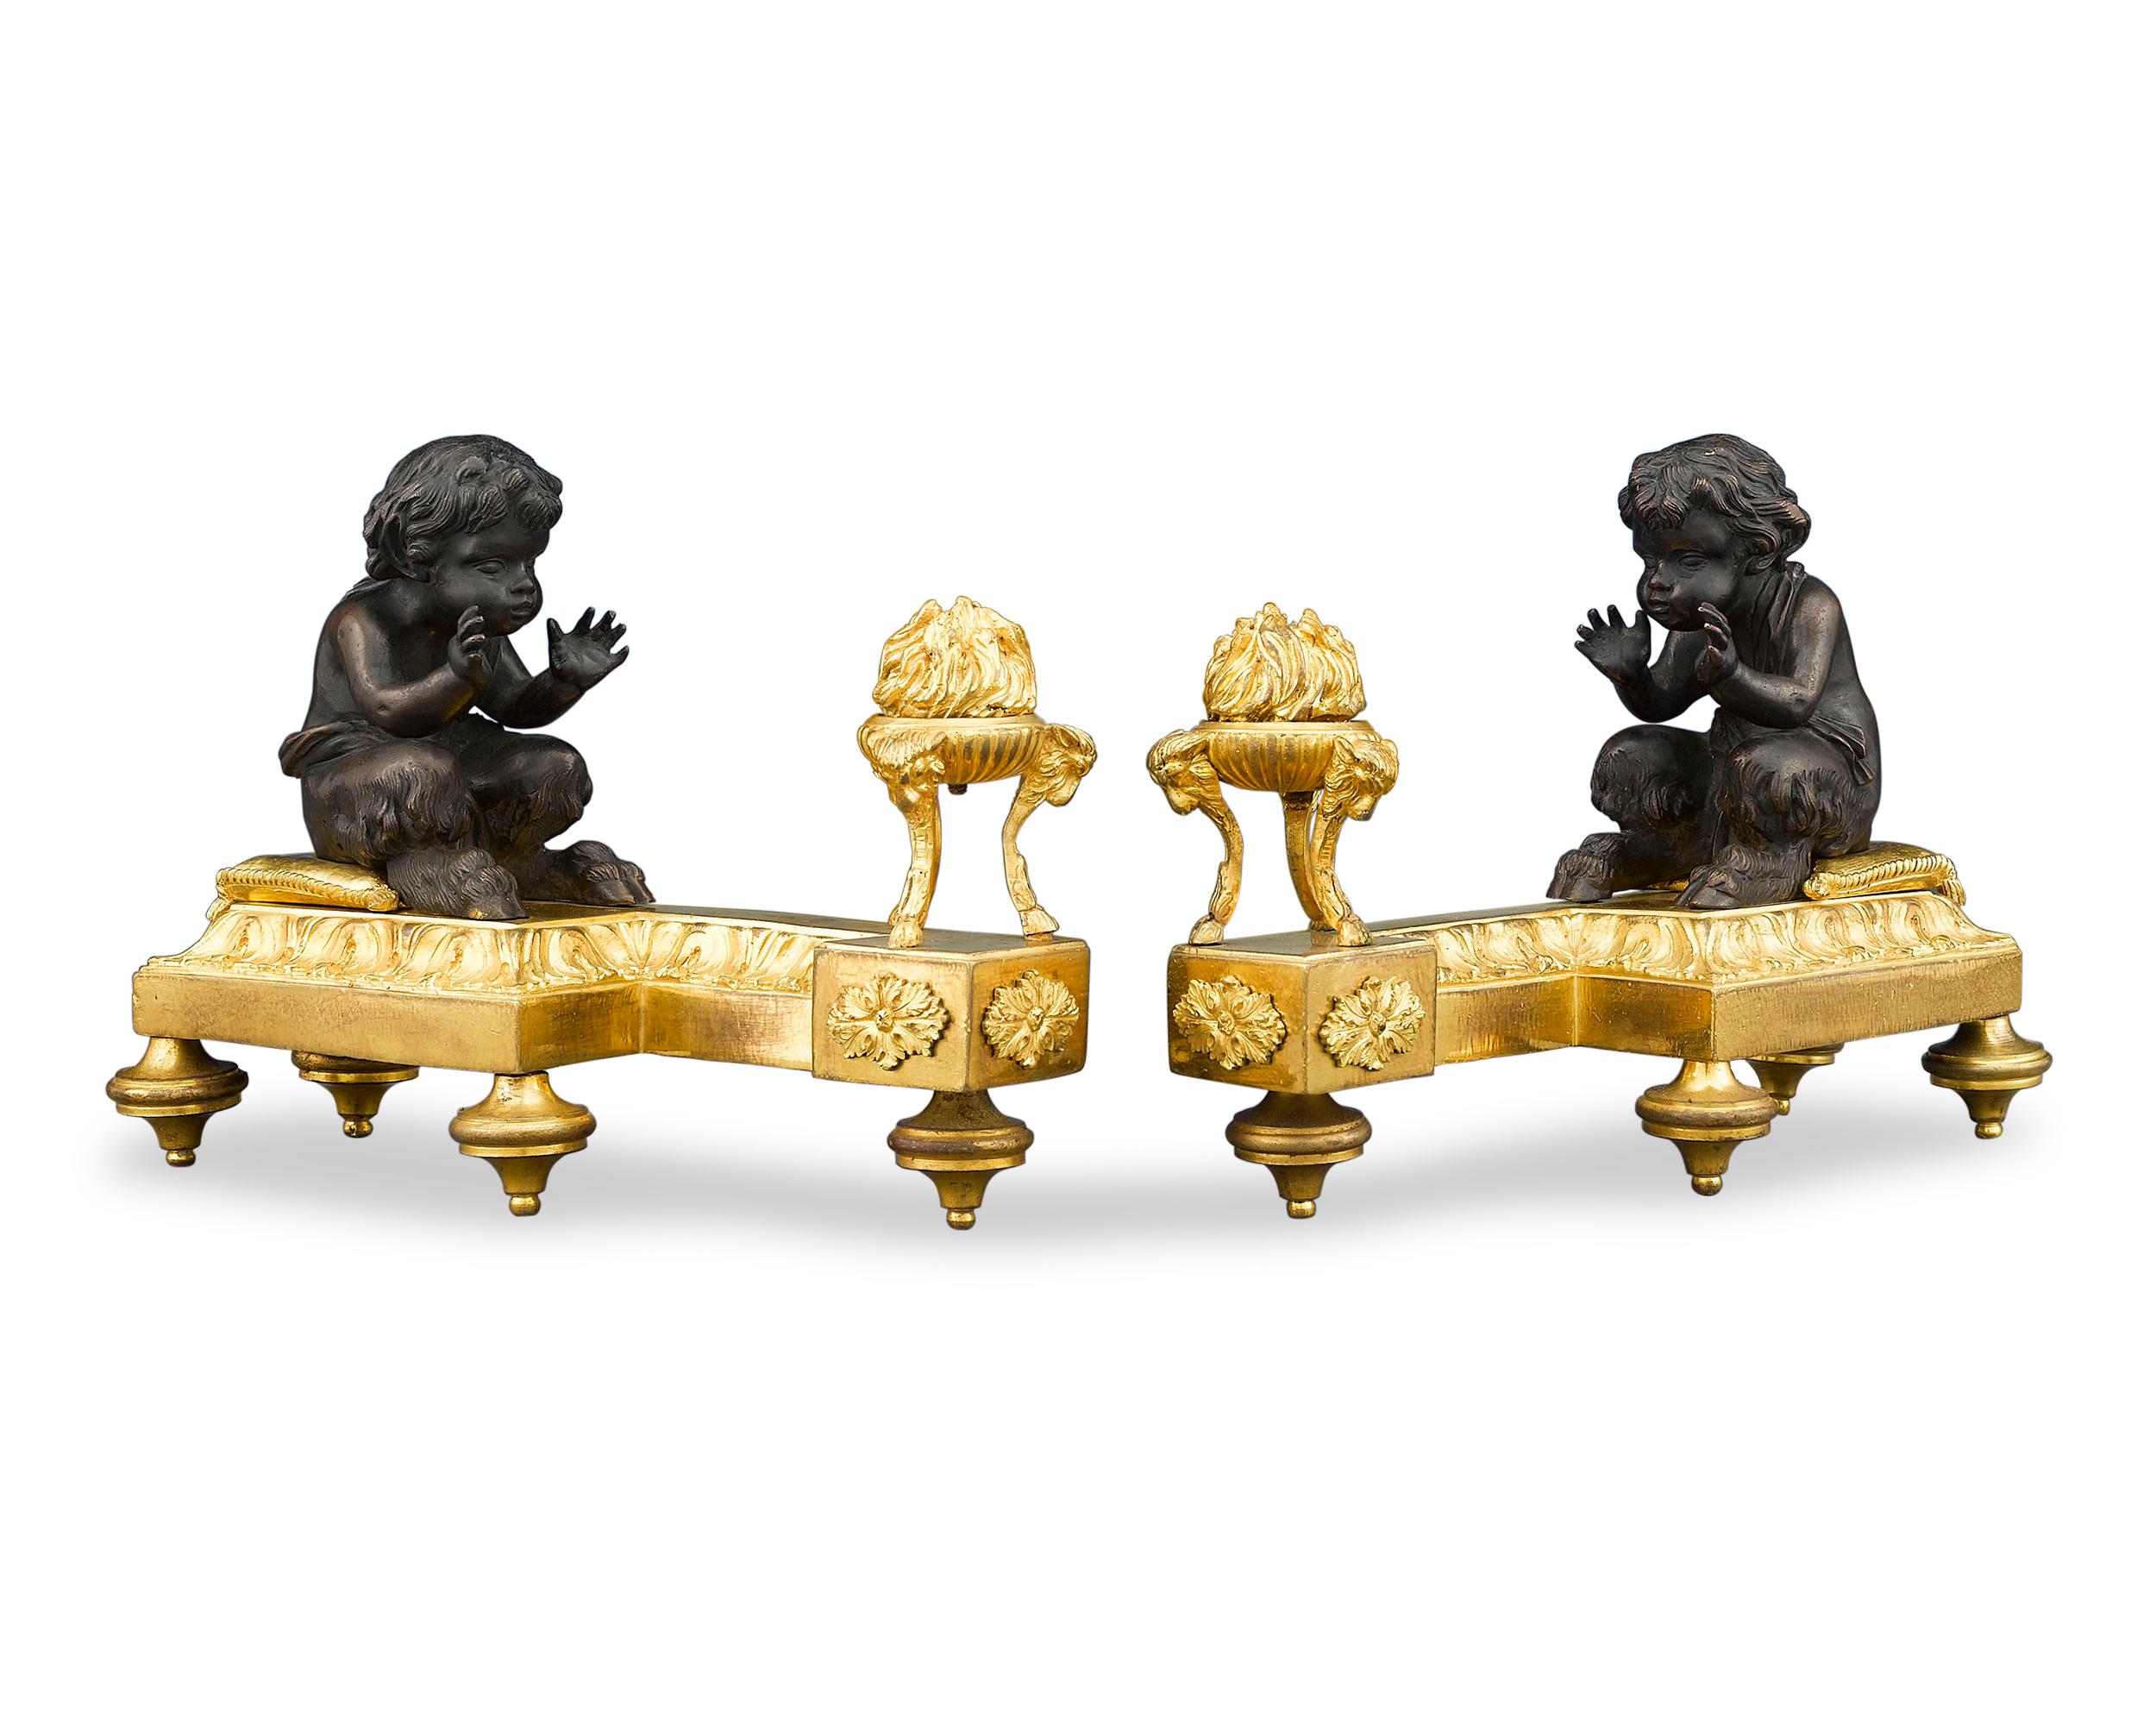 Two little fawns attempt to keep warm by brazier fire in this enchanting pair of French Louis XVI chenets, or fireplace andirons. Crafted of stunning doré and patinated bronze, these figures’ delightful neoclassical elegance is characteristic of